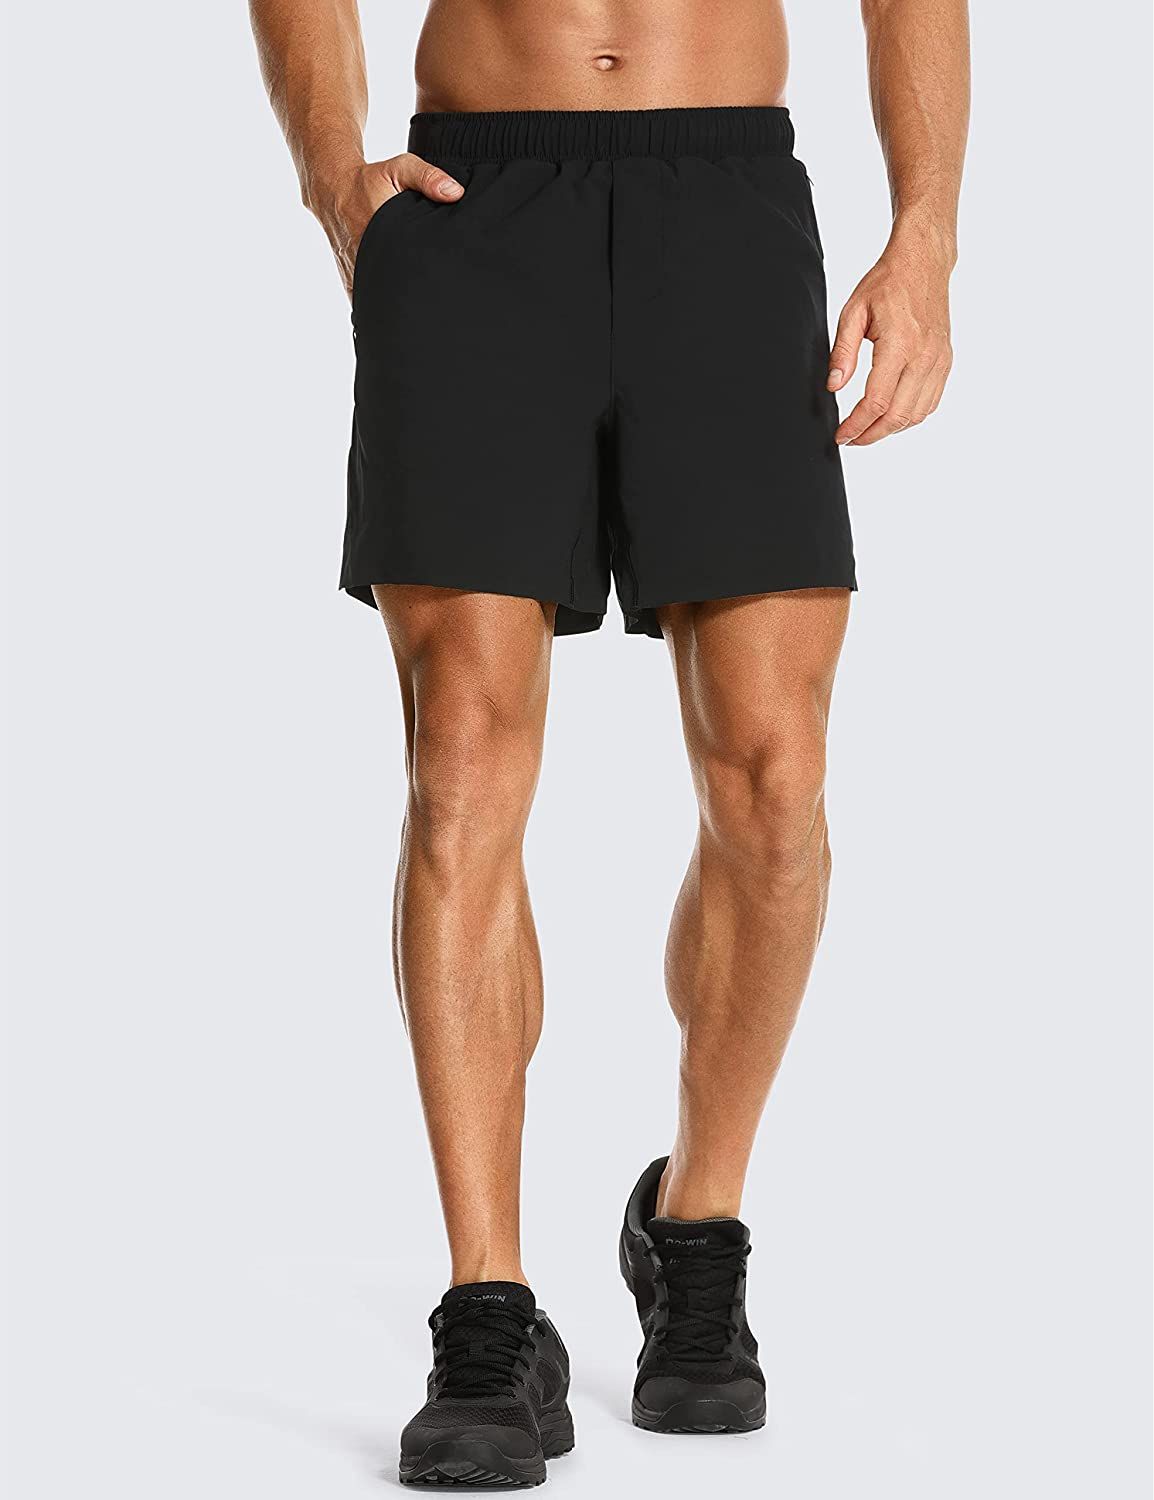 CRZ YOGA Men's 2 in 1 Gym Workout Shorts with Liner - 6'' Quick Dry Running Athletic Shorts with ... | Amazon (US)